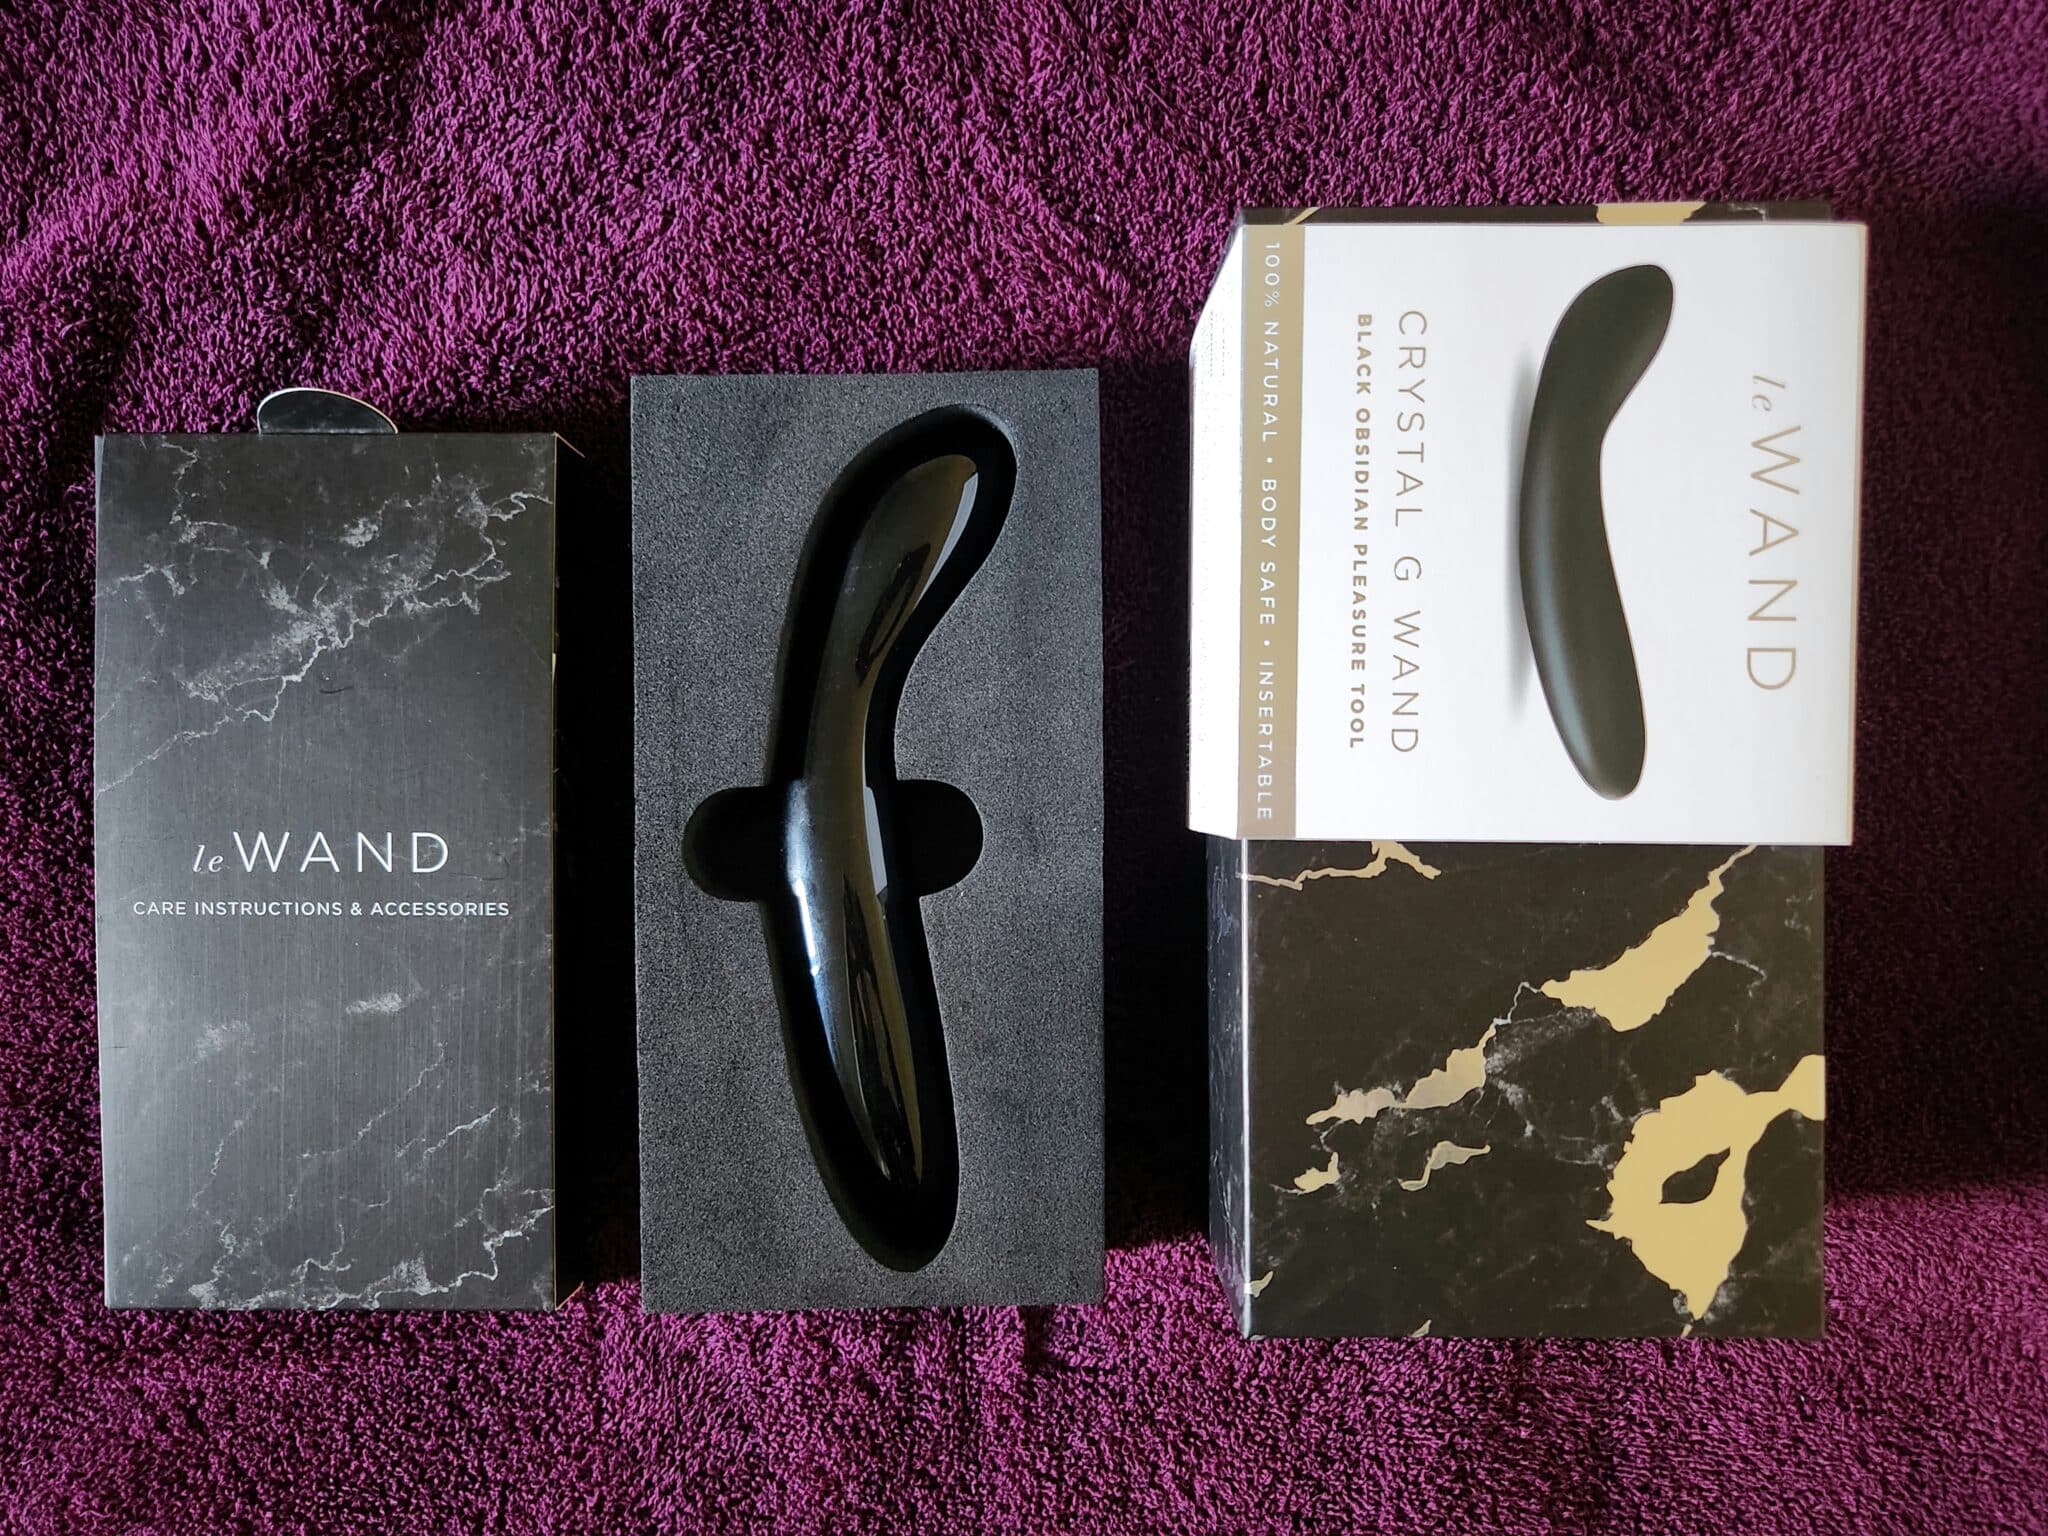 Le Wand Crystal G The Le Wand Crystal G: Presentation and Packaging